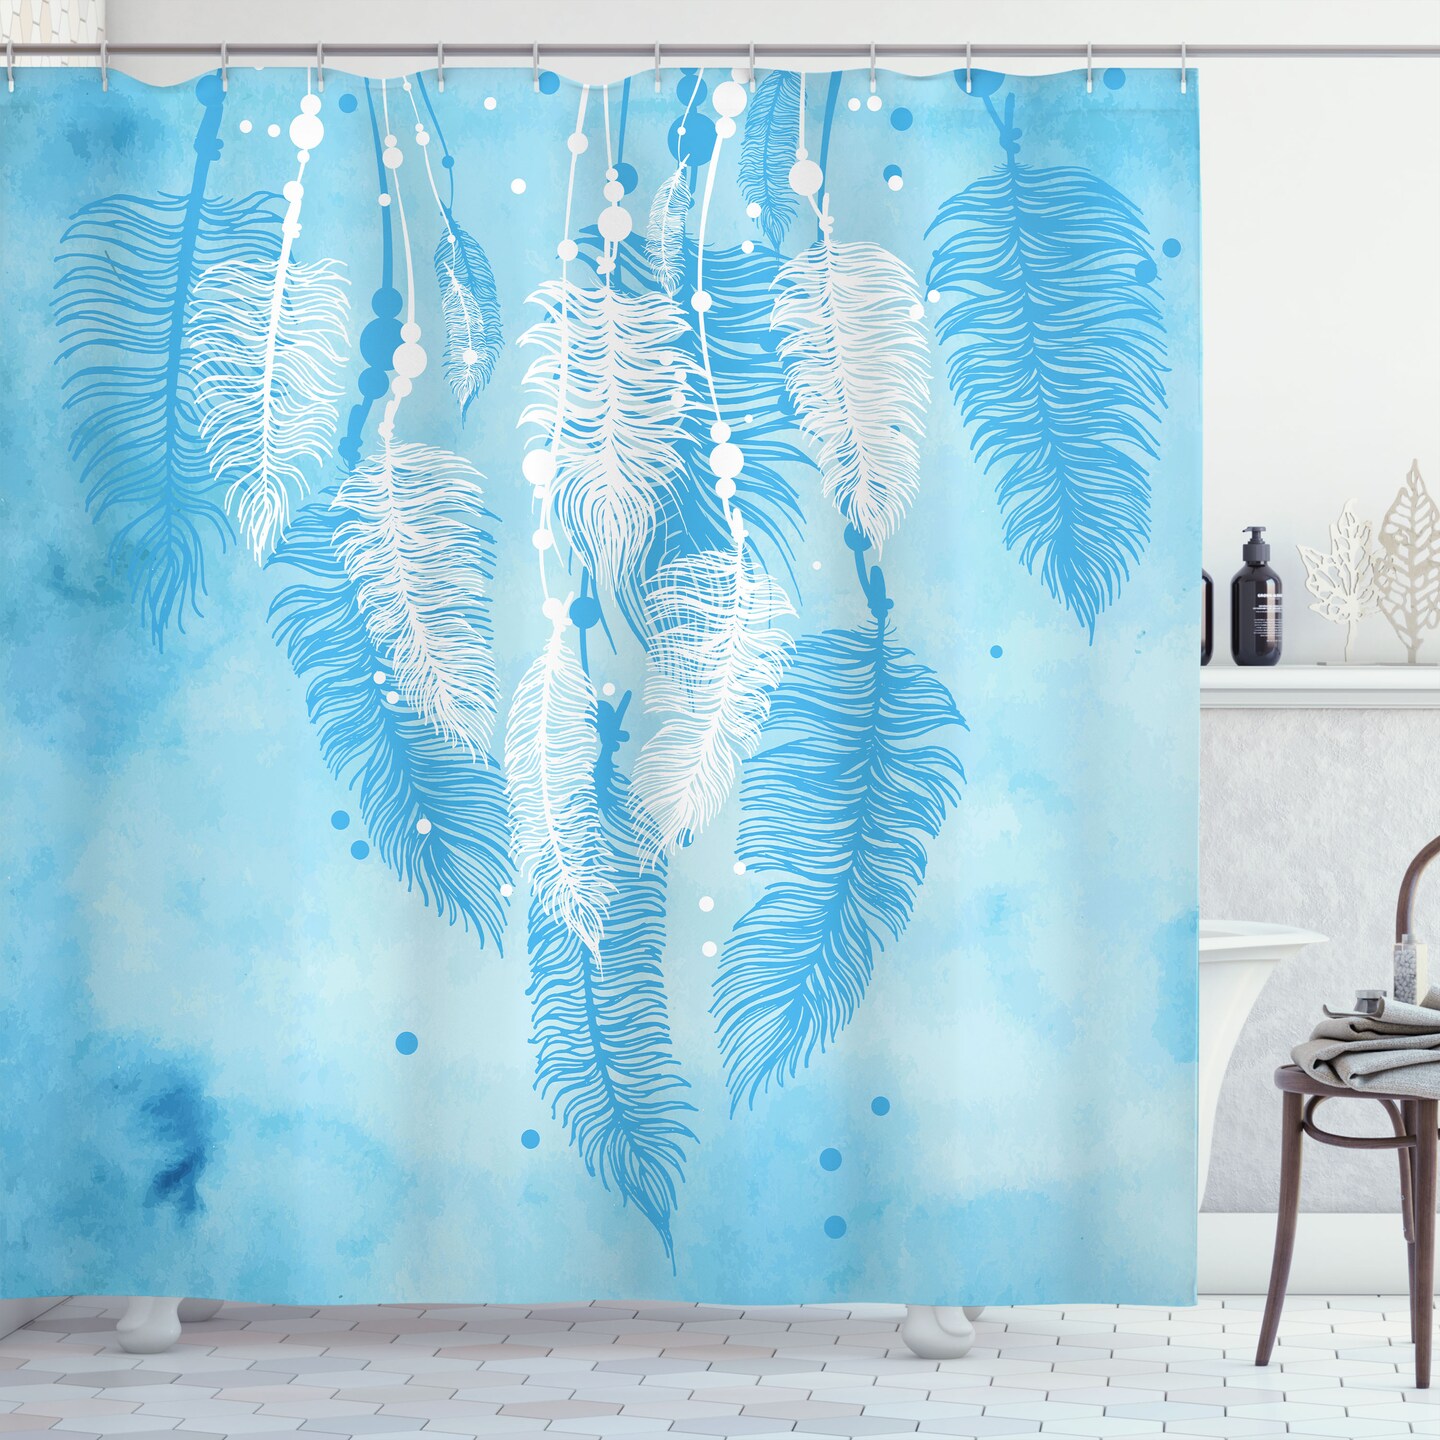 Ambesonne Tribal Shower Curtain, Watercolors Style Digital Made Feather  Hanging Down in Picture Aztec, Cloth Fabric Bathroom Decor Set with Hooks,  69 W x 70 L, Blue White